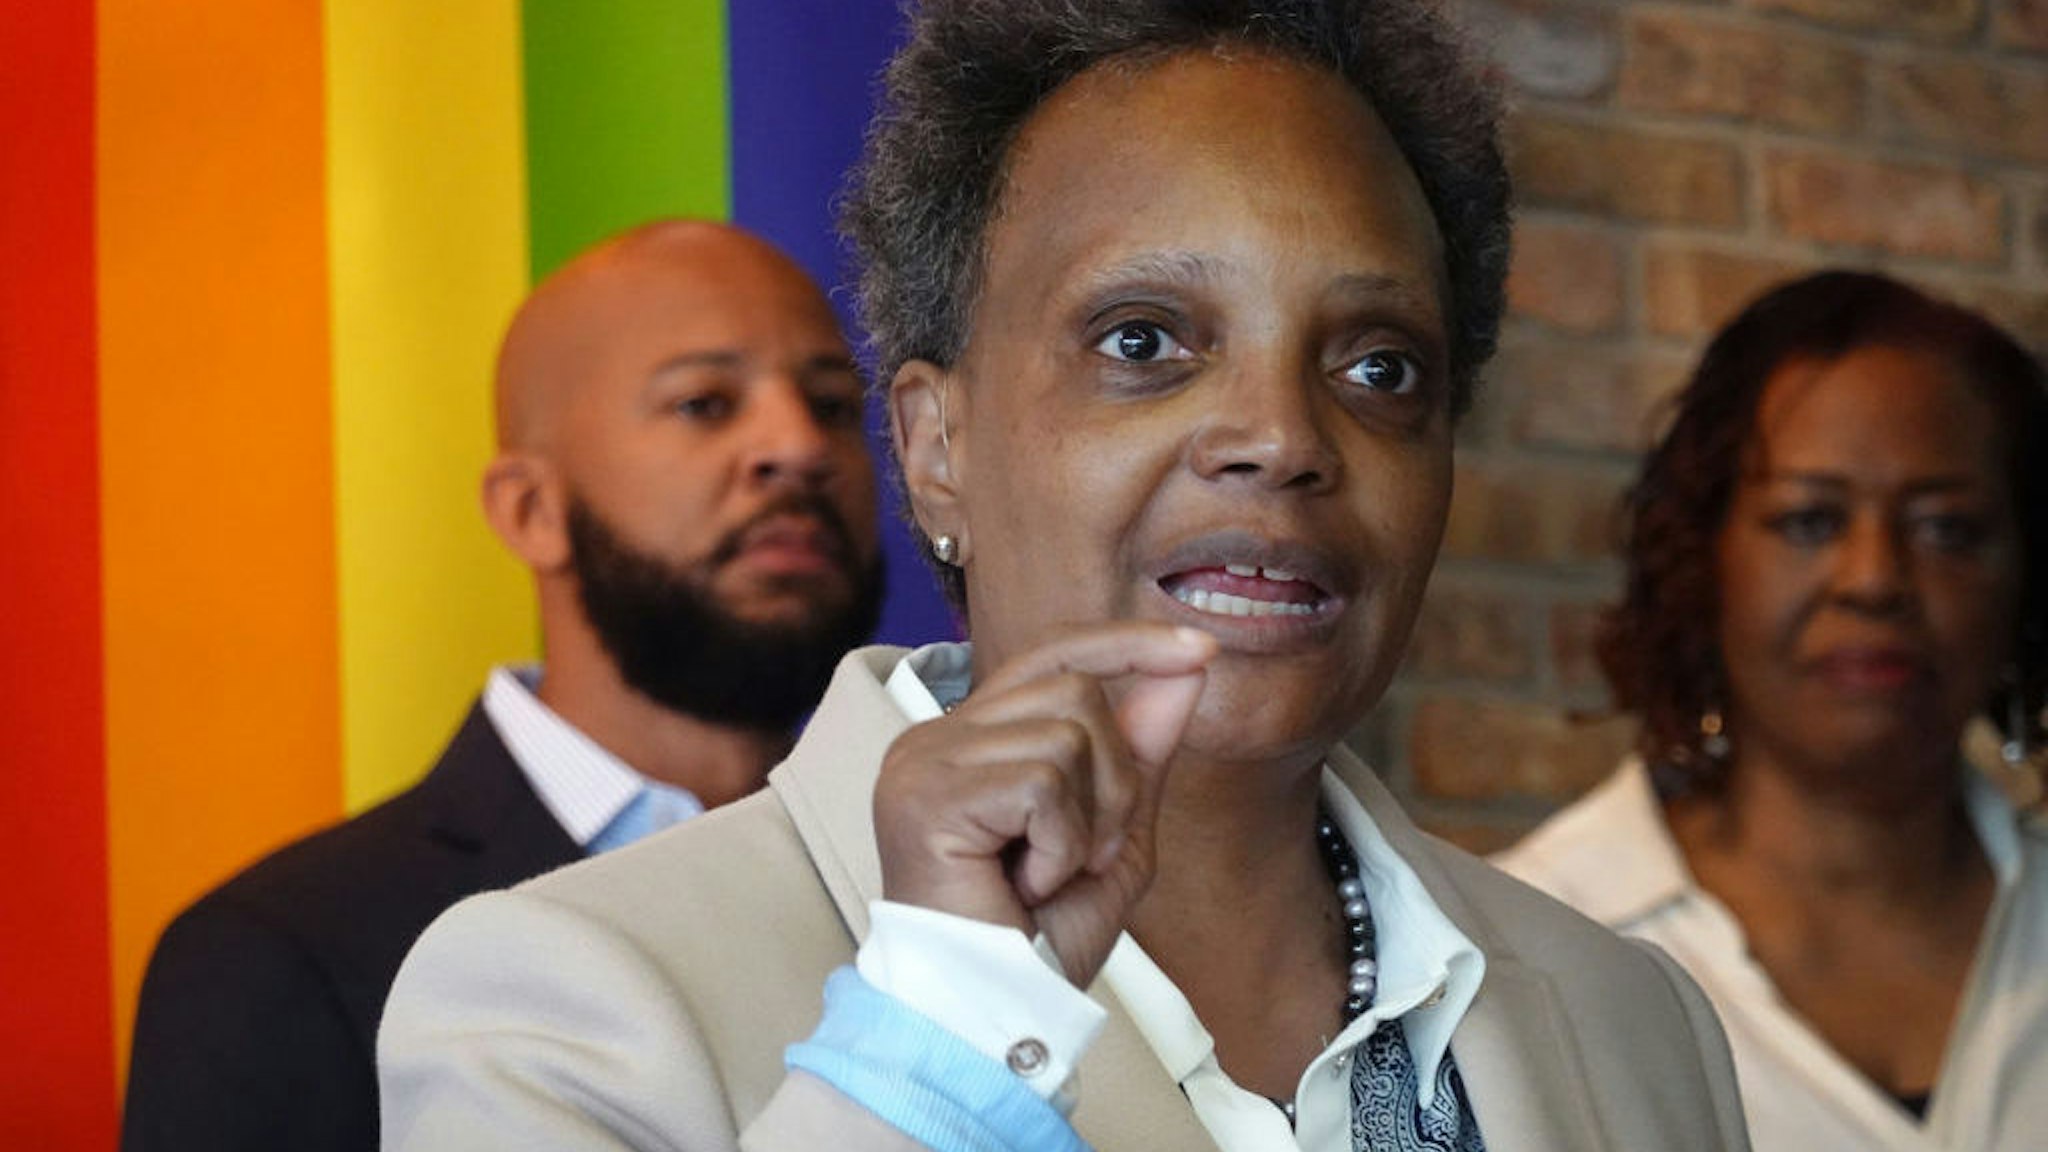 CHICAGO, ILLINOIS - JUNE 07: Chicago Mayor Lori Lightfoot speaks to guests at an event held to celebrate Pride Month at the Center on Halstead, a lesbian, gay, bisexual, and transgender community center, on June 07, 2021 in Chicago, Illinois. Lightfoot is the first openly gay mayor of the city of Chicago. (Photo by Scott Olson/Getty Images)